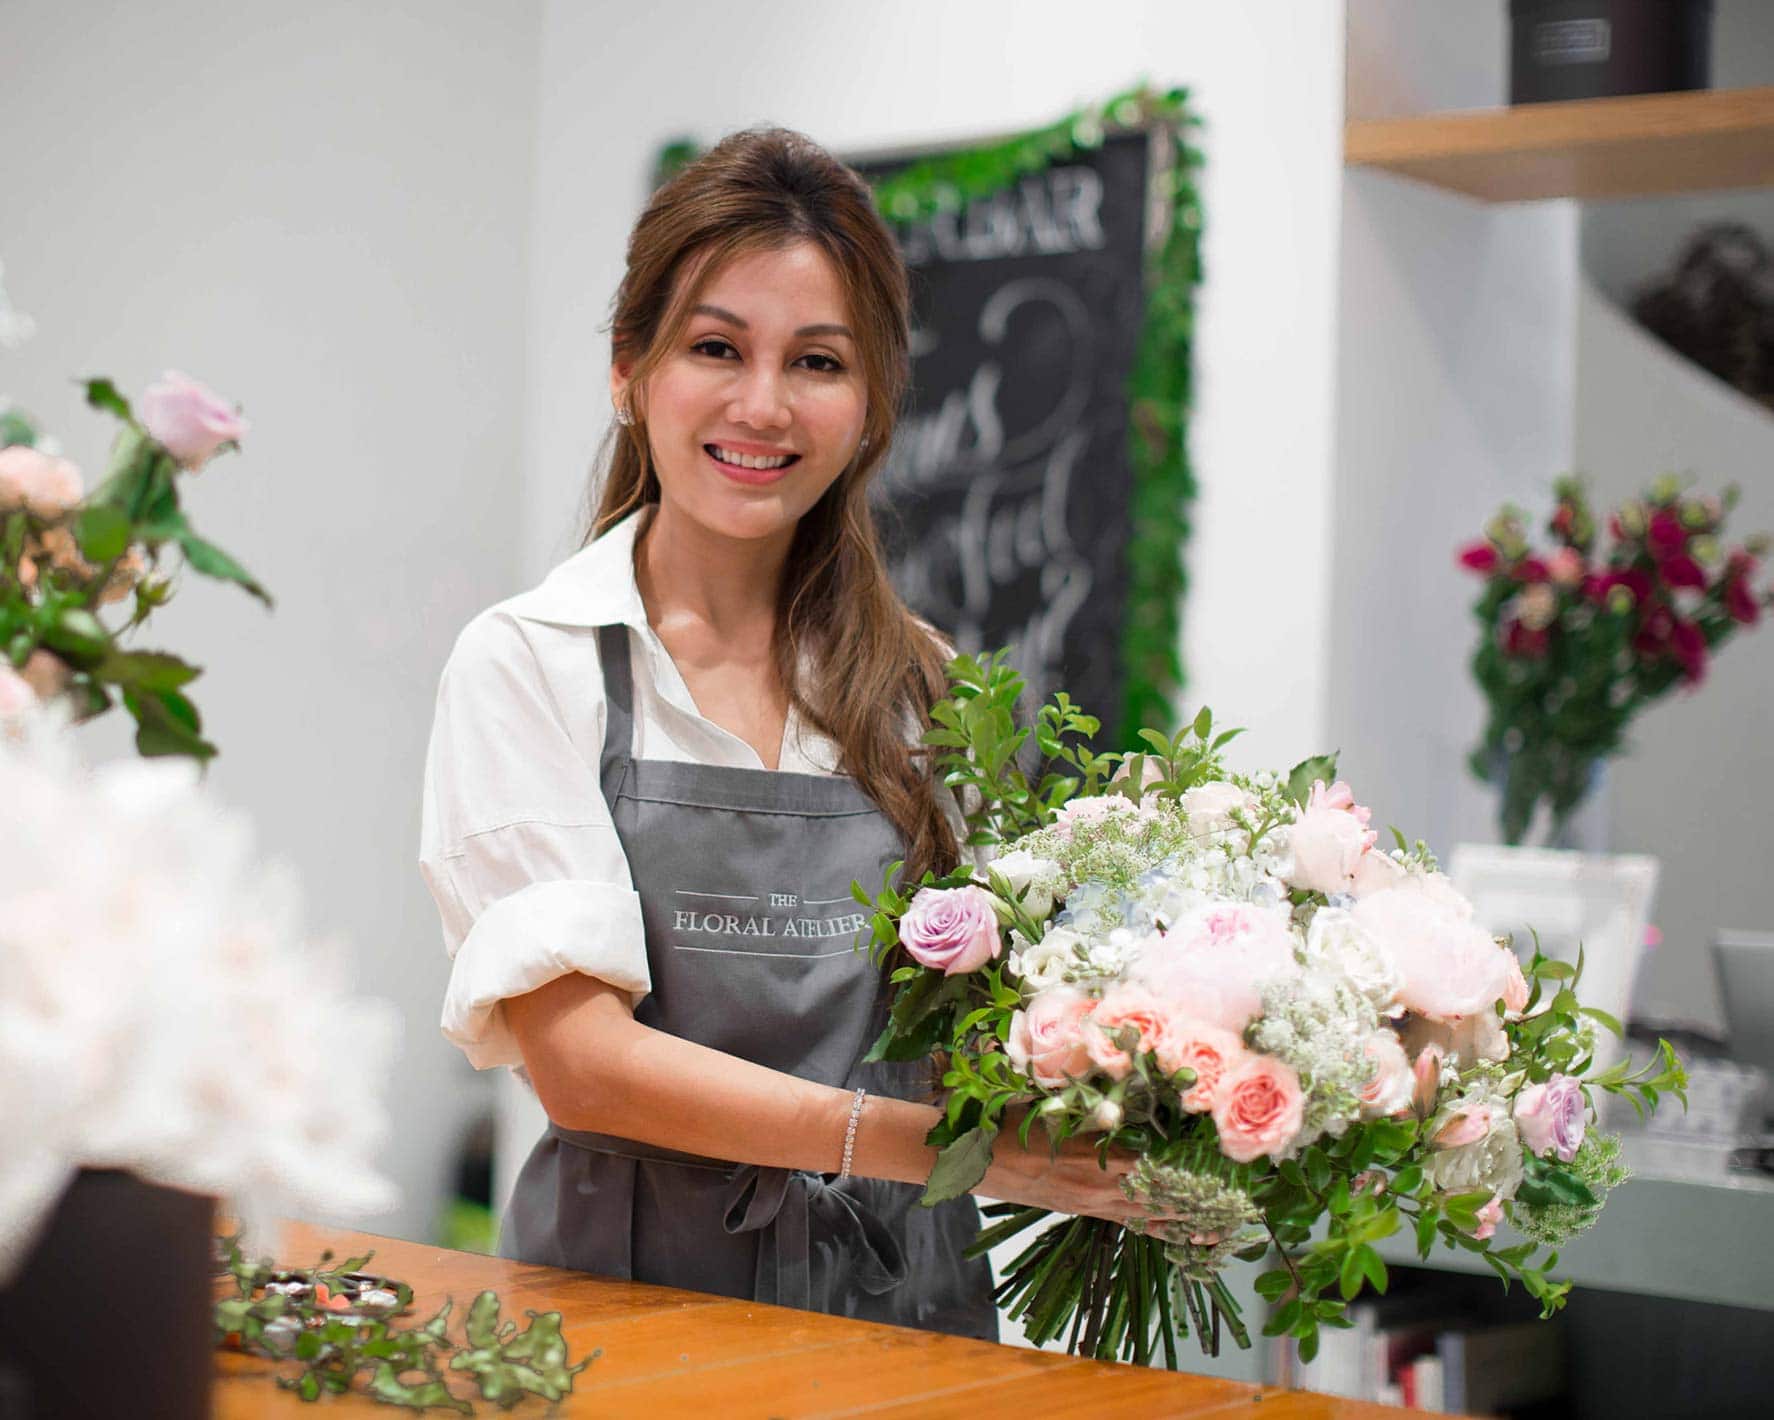 A person arranging flowers in a store.